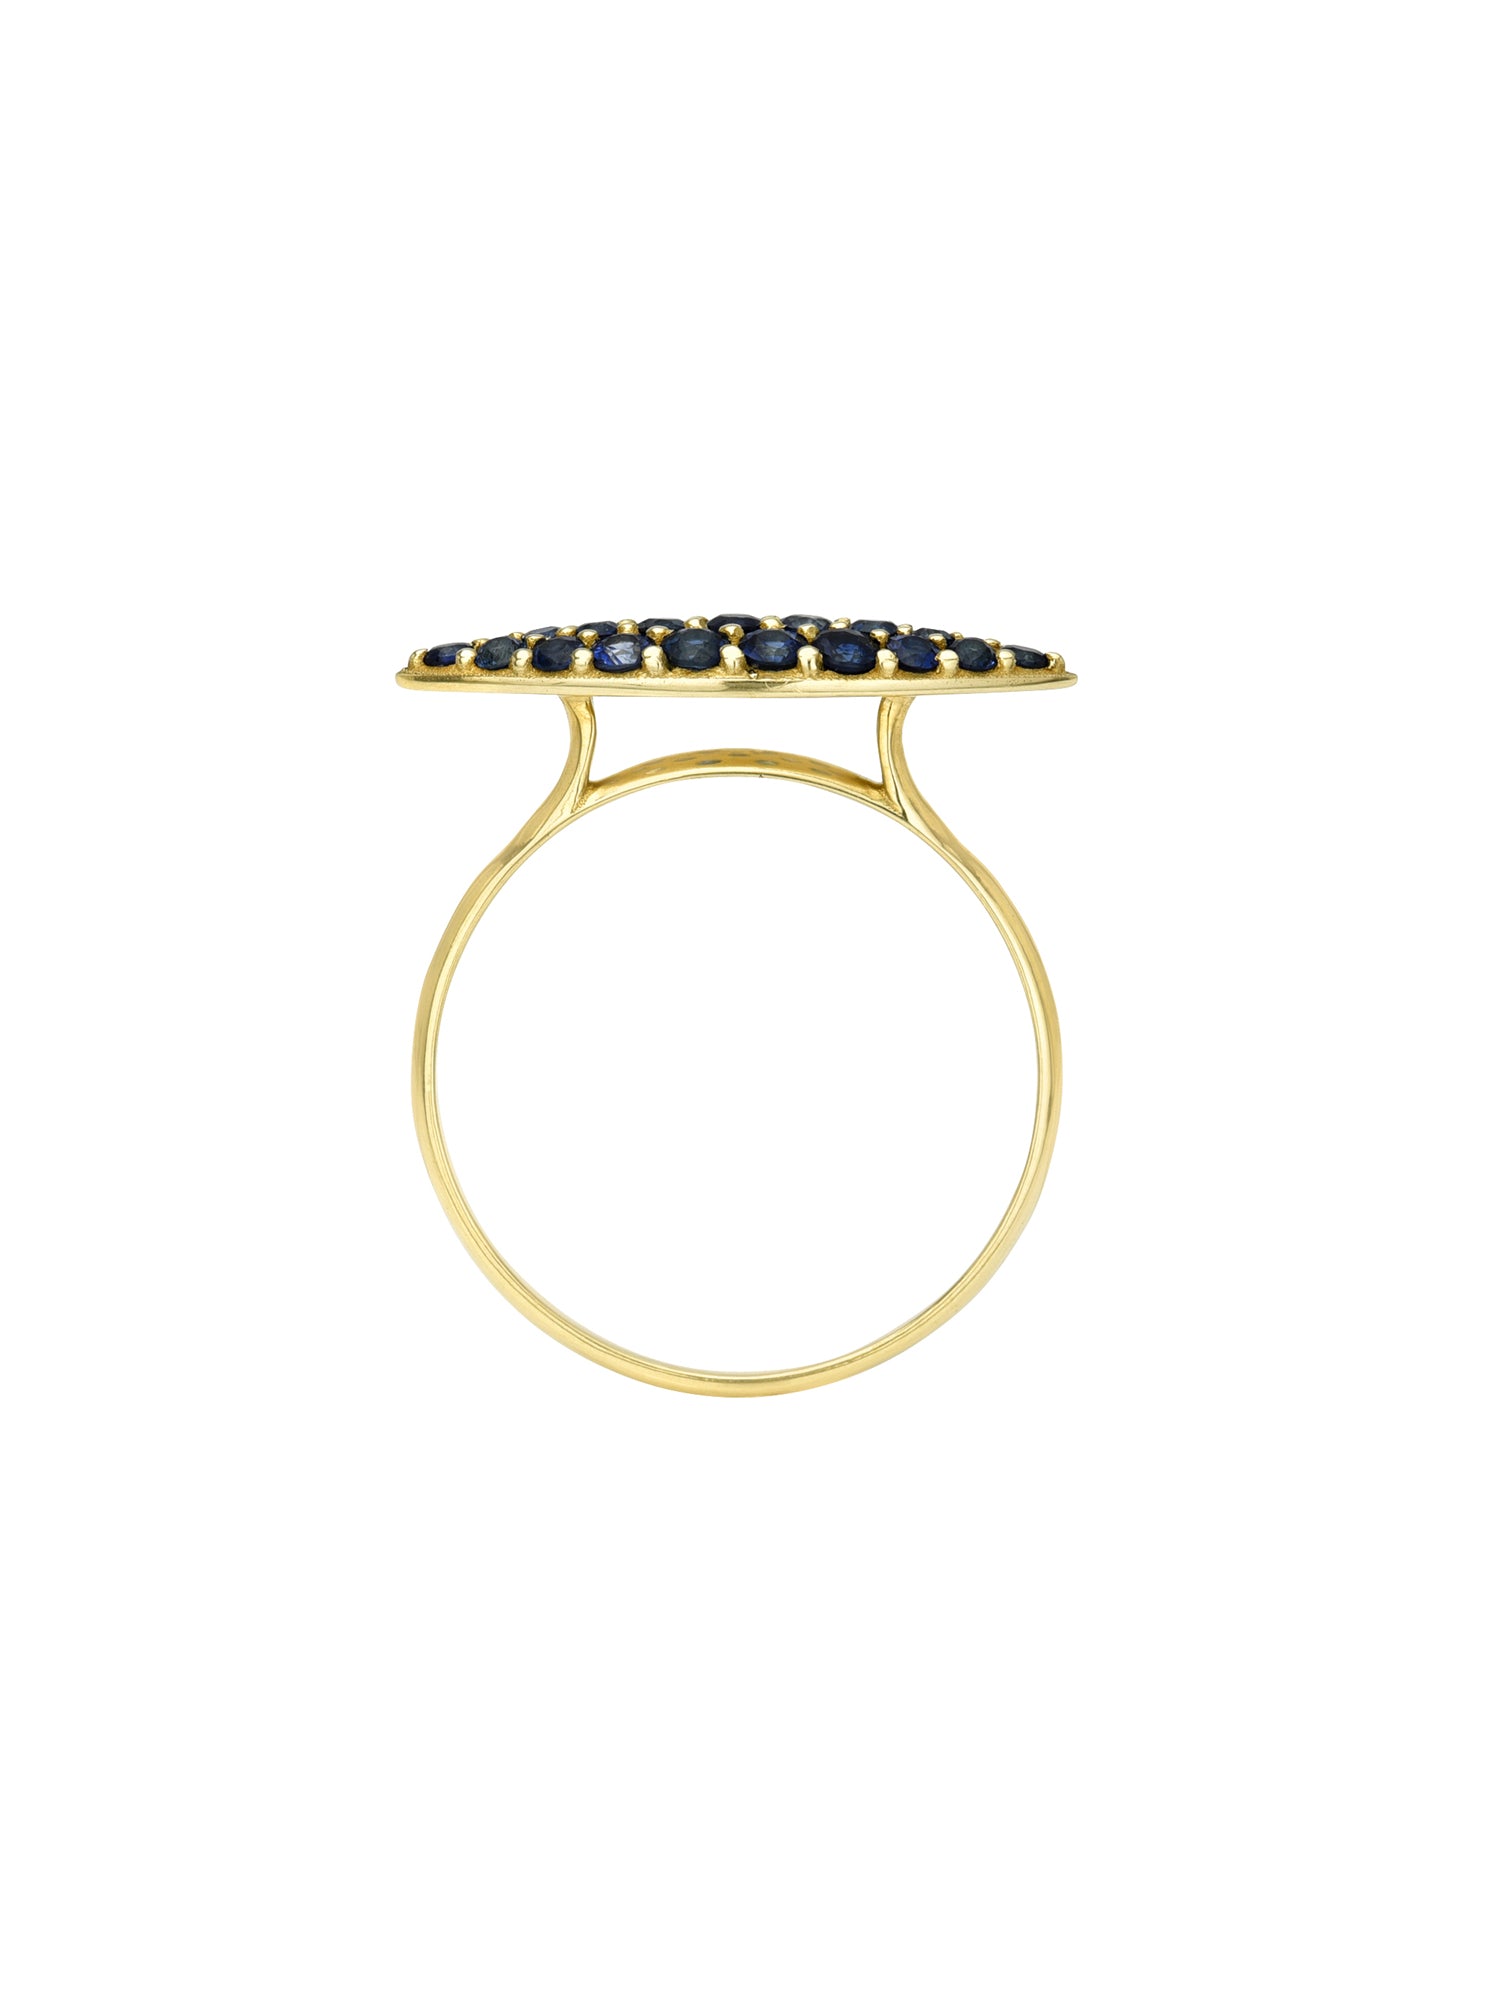 'Sapphire Marquis' - Ring